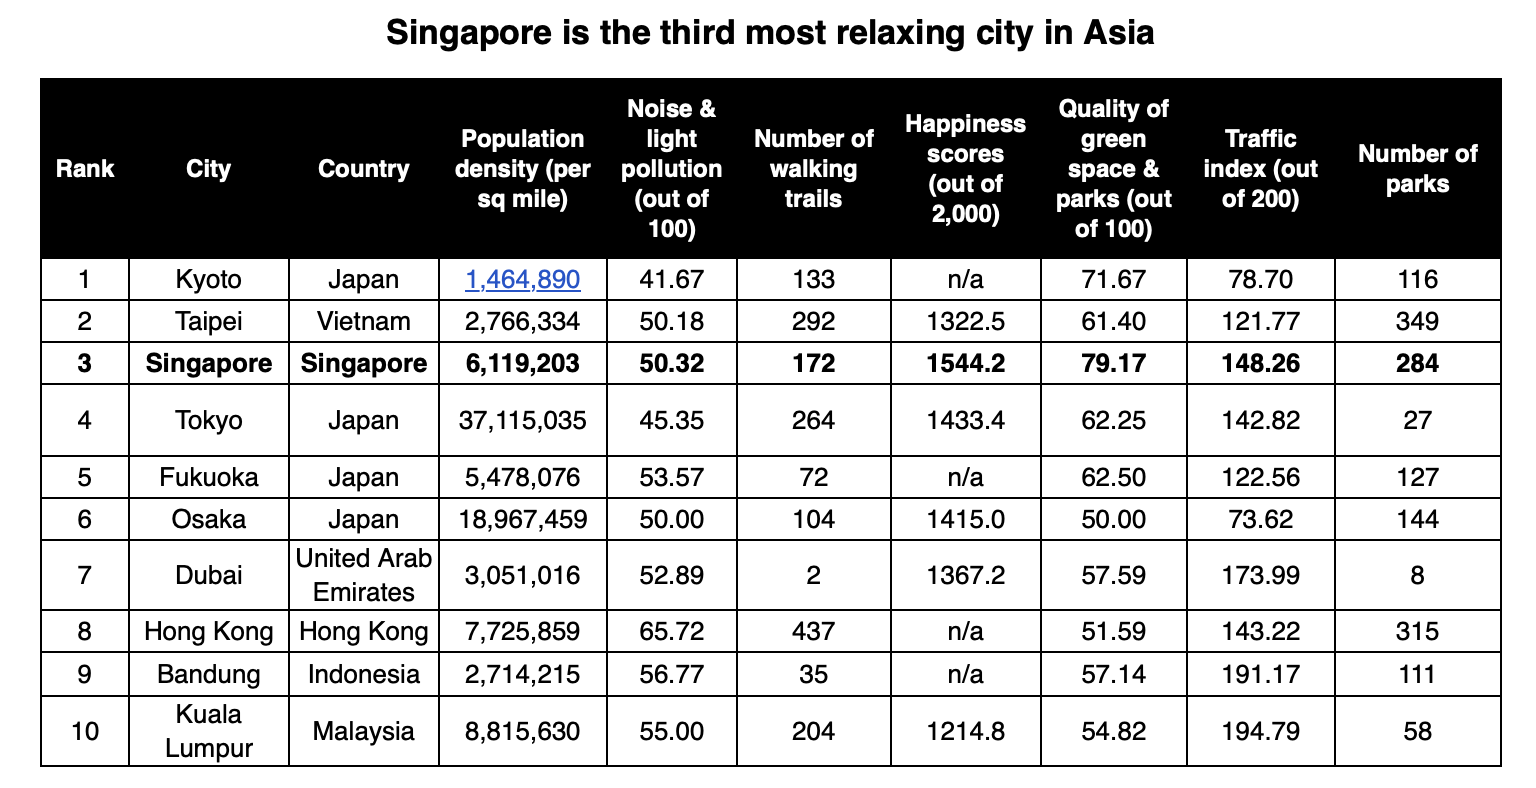 Singapore is the third most relaxing city in Asia